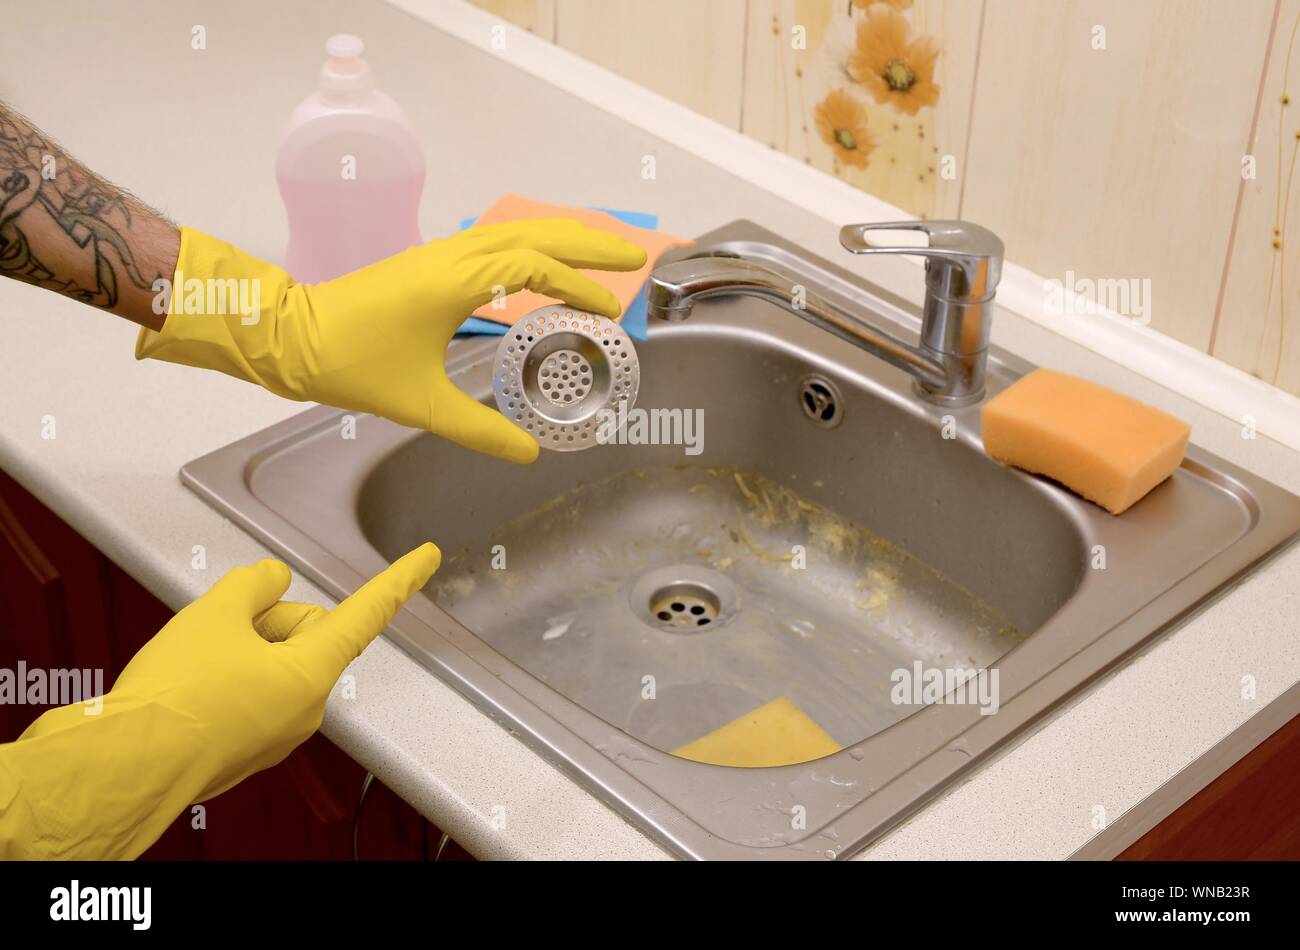 Cleaner in rubber gloves shows clean plughole protector of a